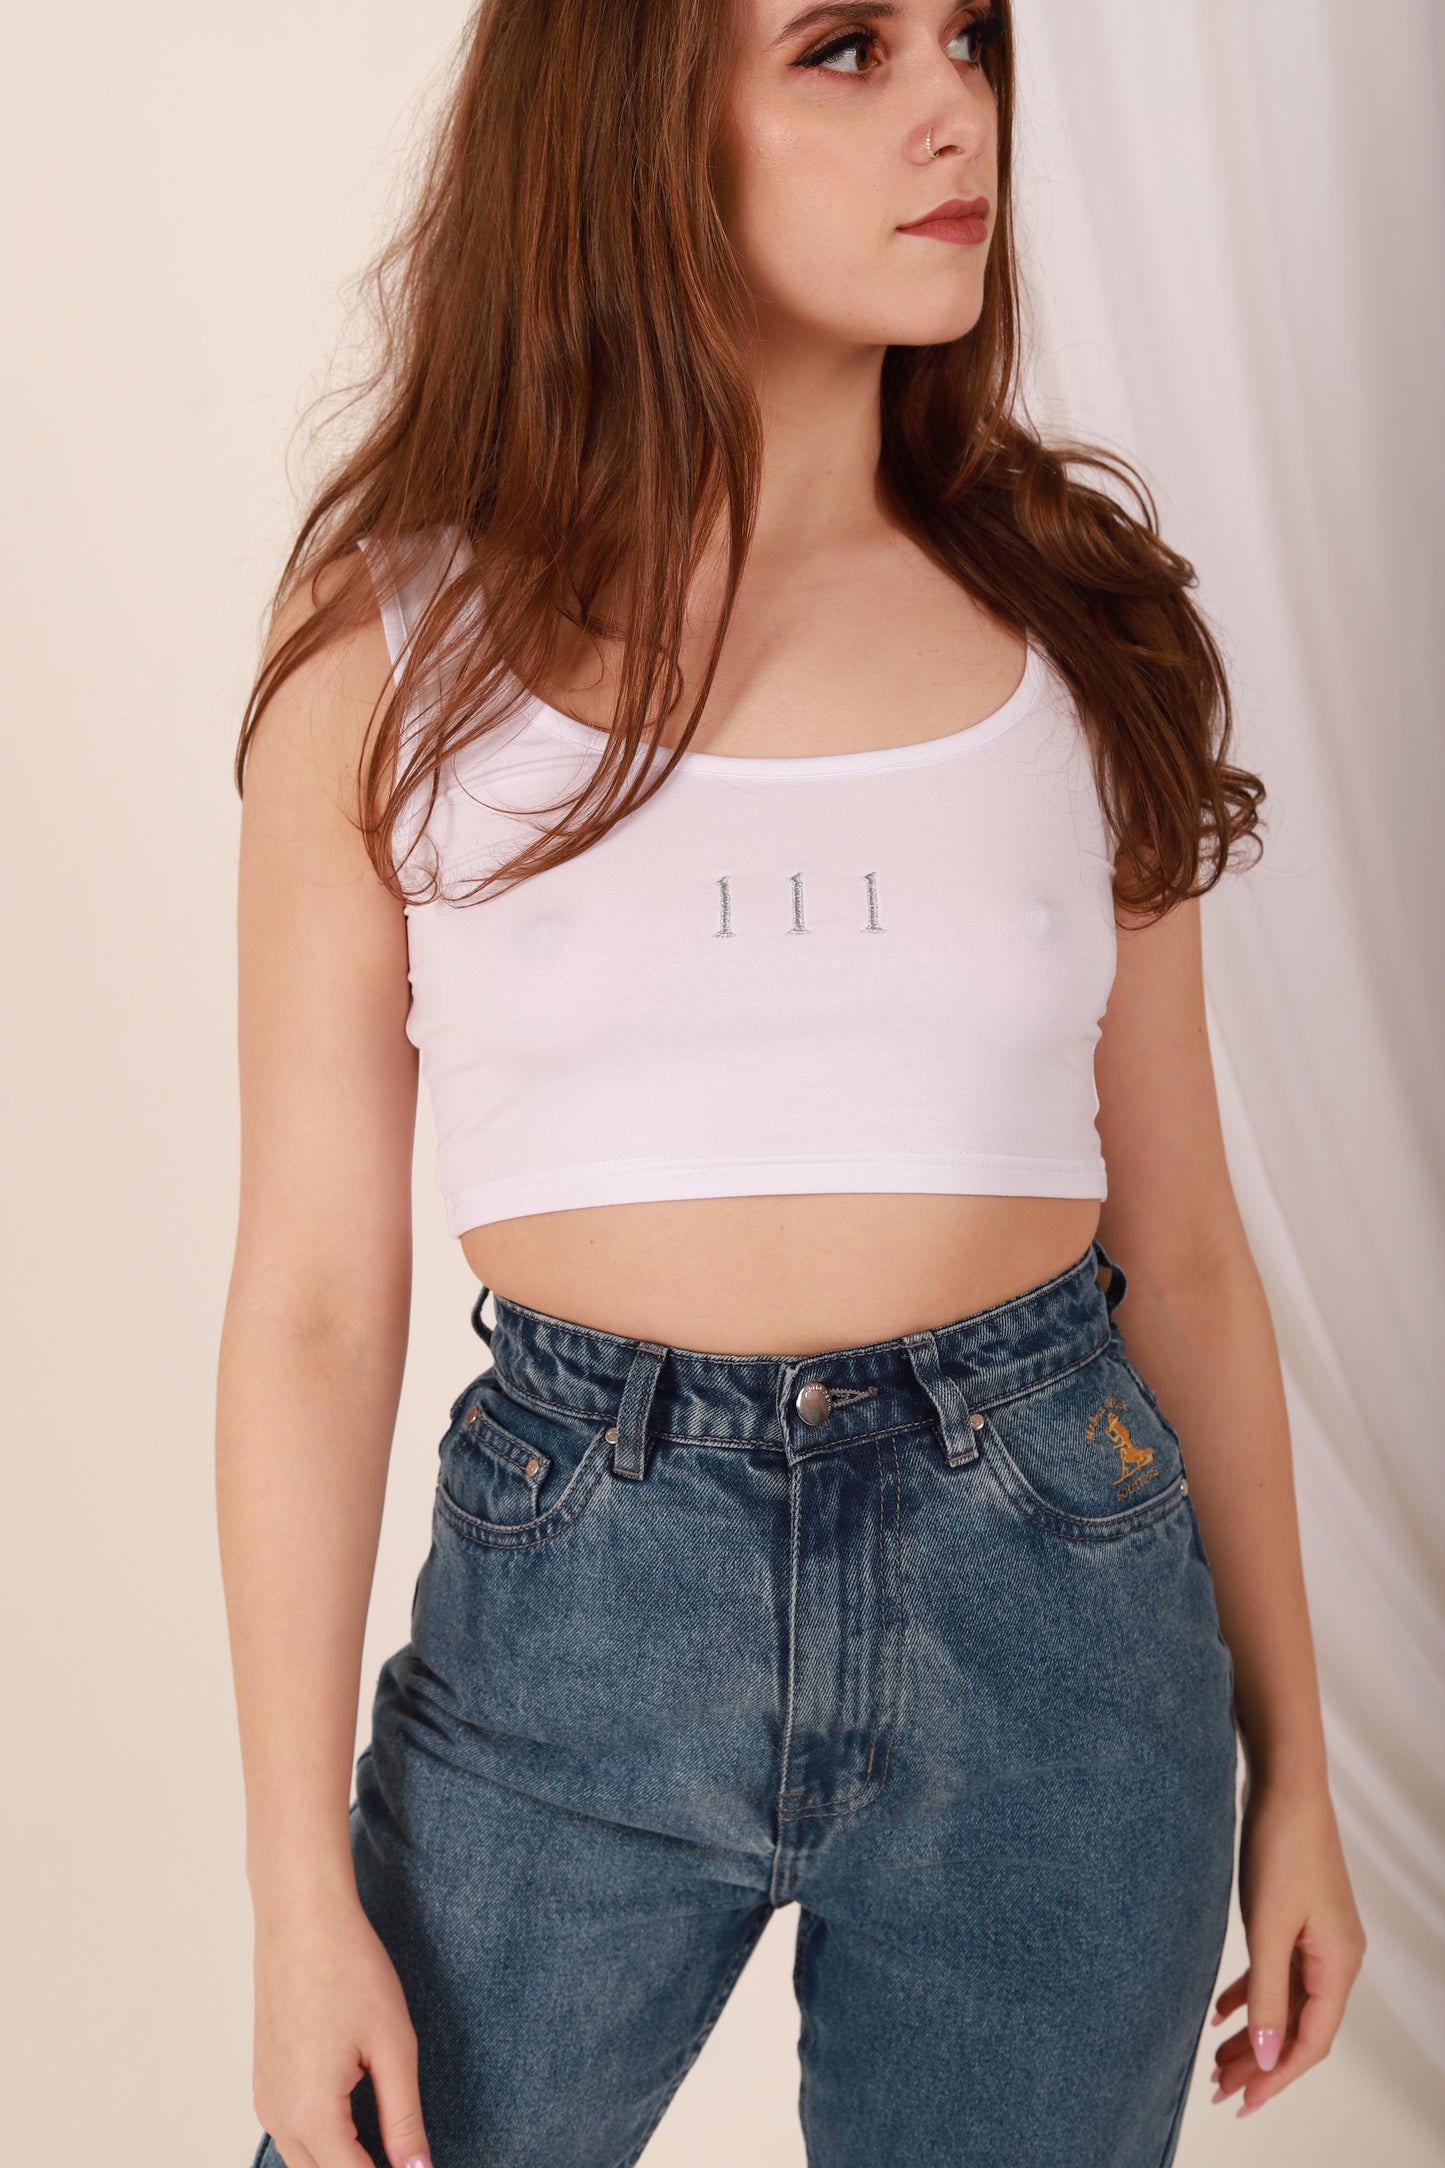 Silky Style Dainty 111 Crop Top